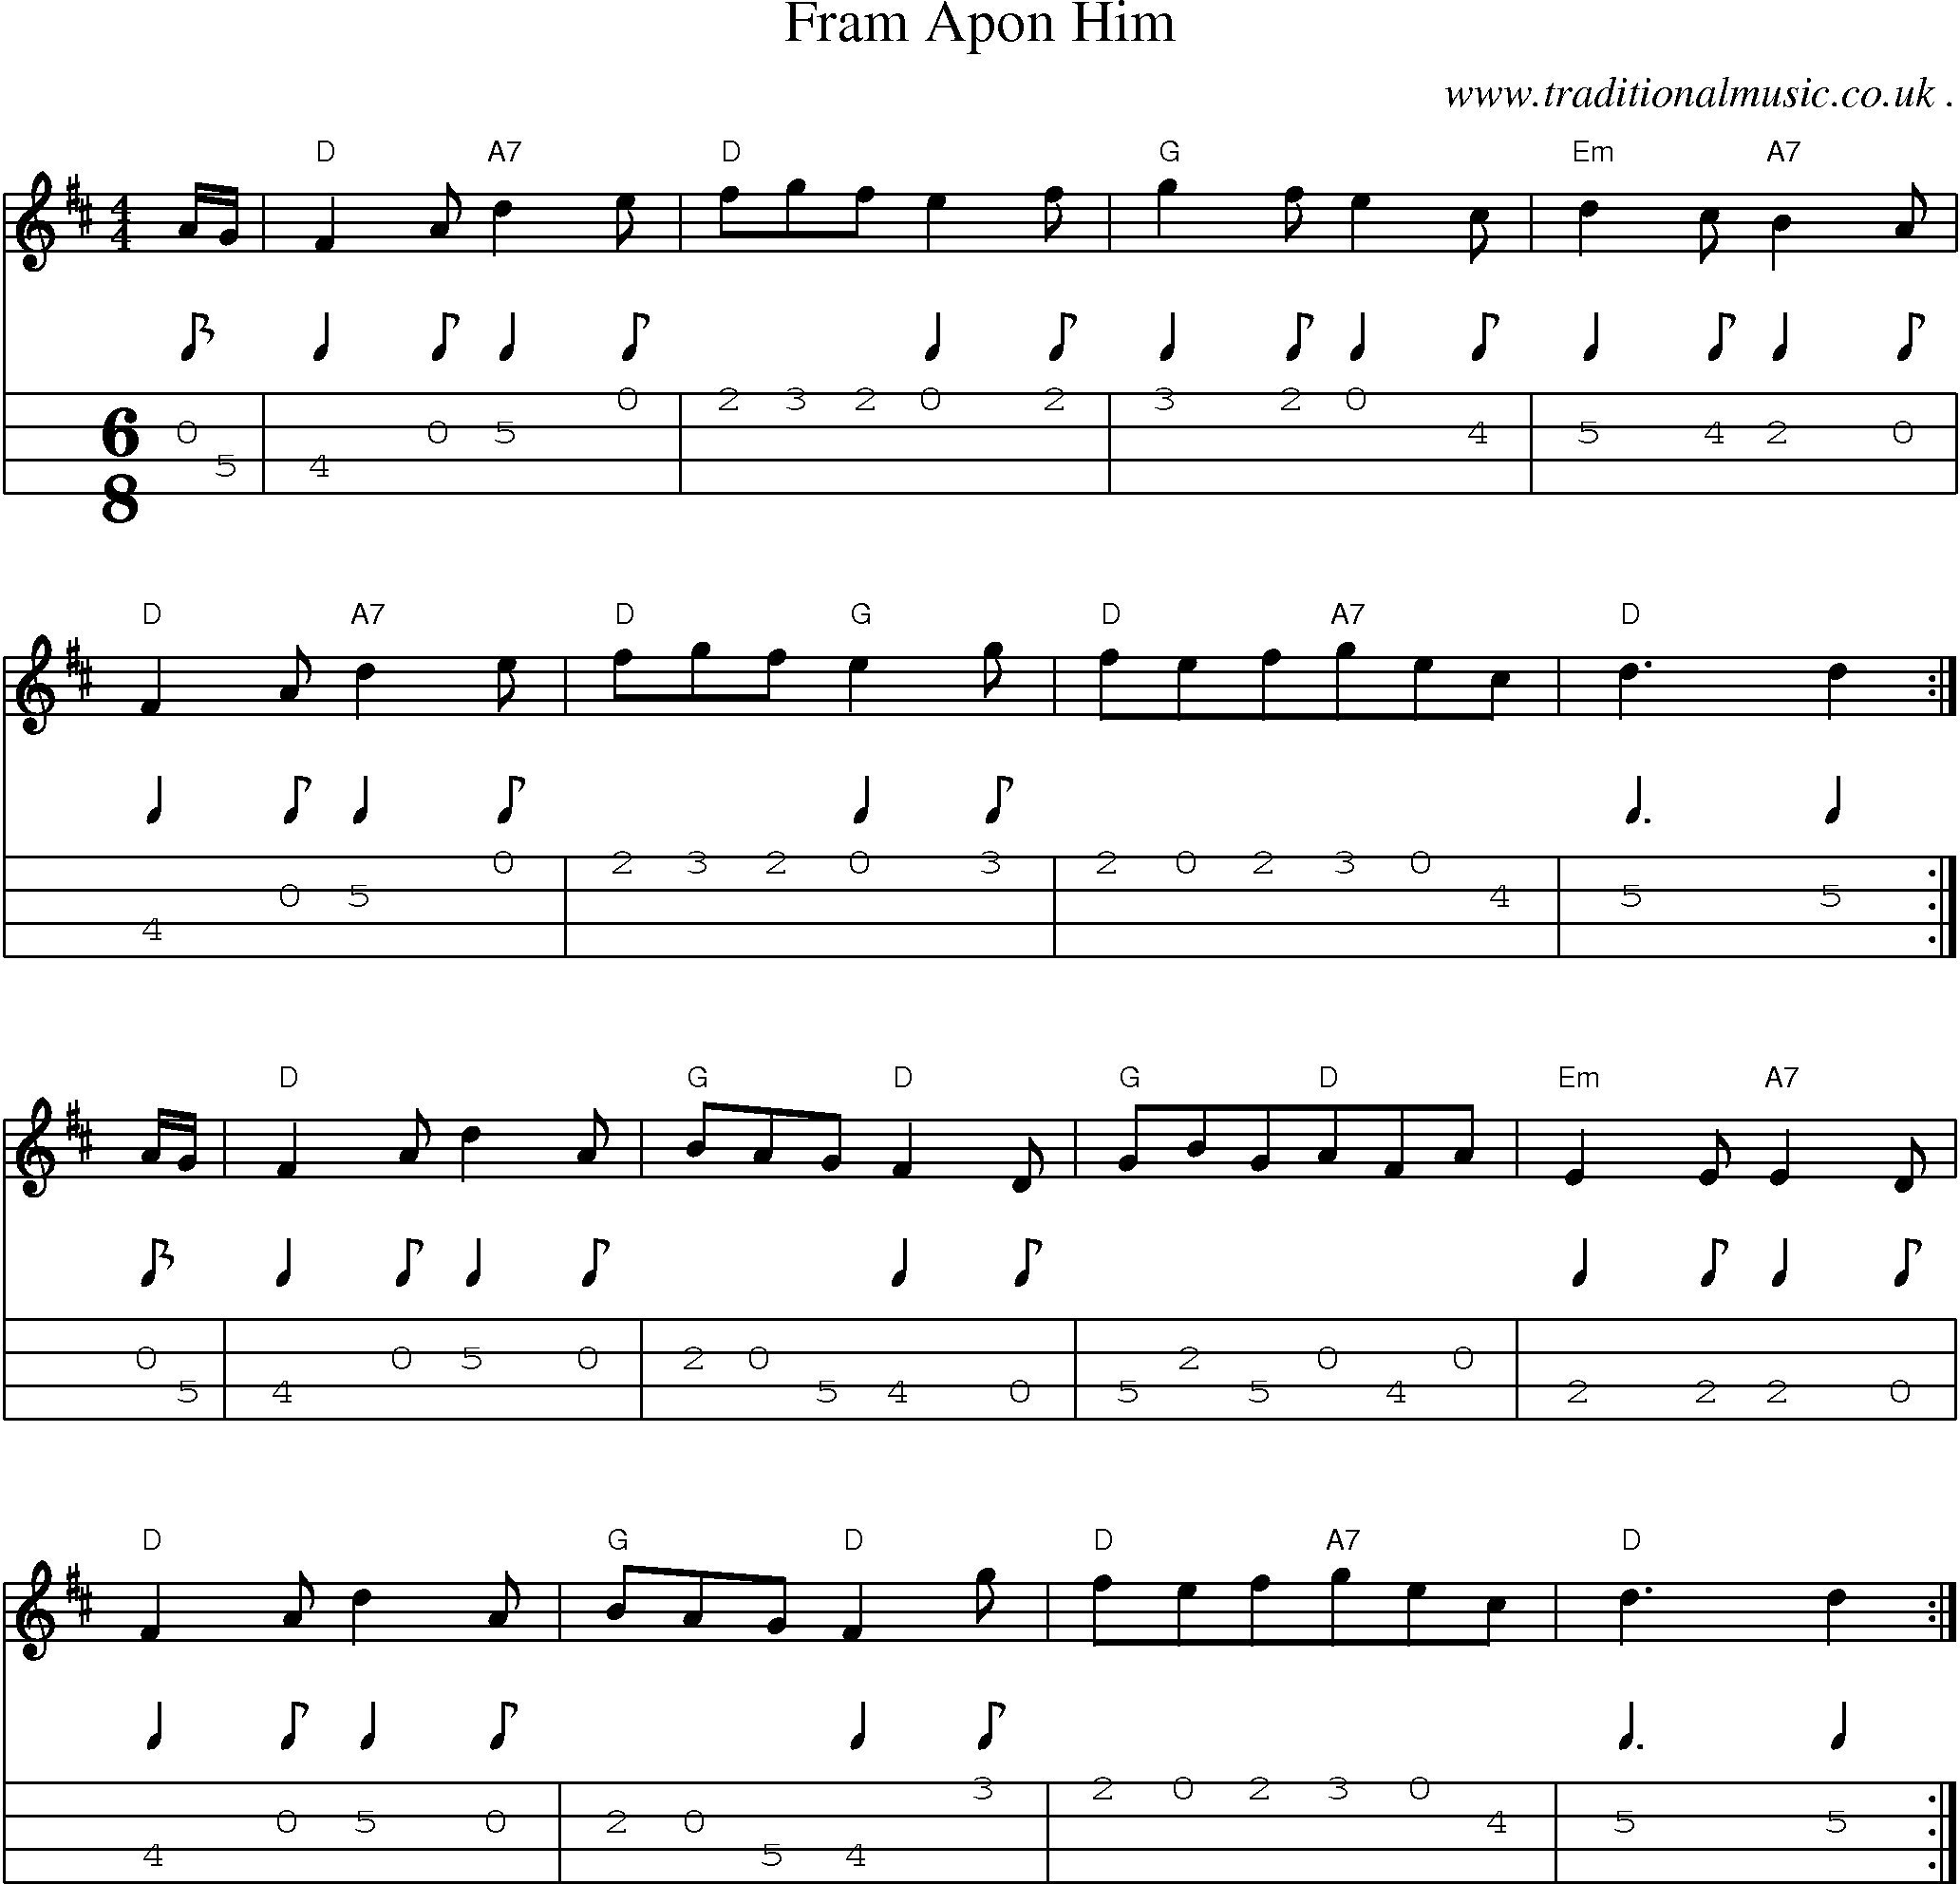 Sheet-Music and Mandolin Tabs for Fram Apon Him